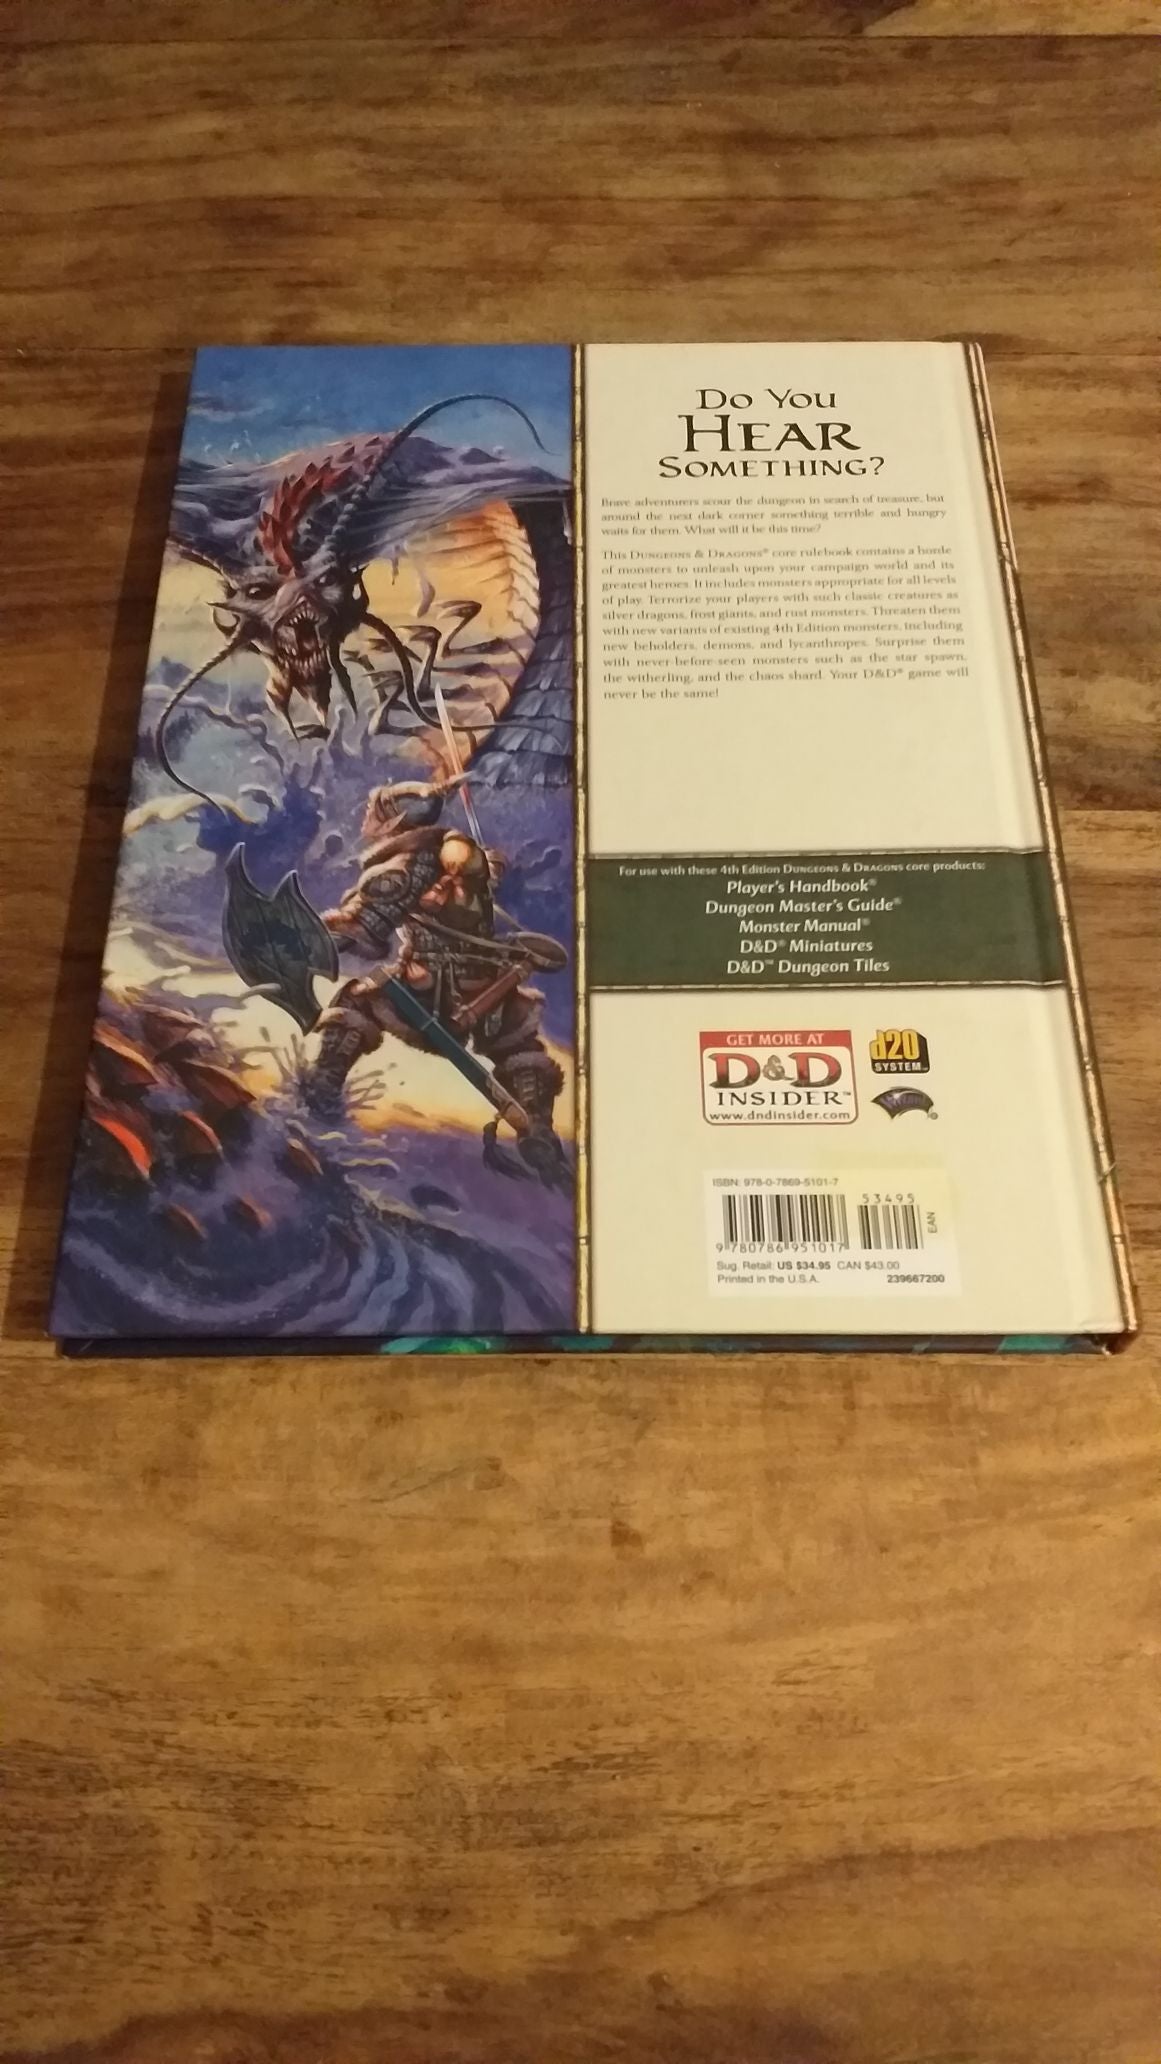 Monster Manual 2 Dungeons & Dragons 4th Edition Hardback Wizards of the Coast